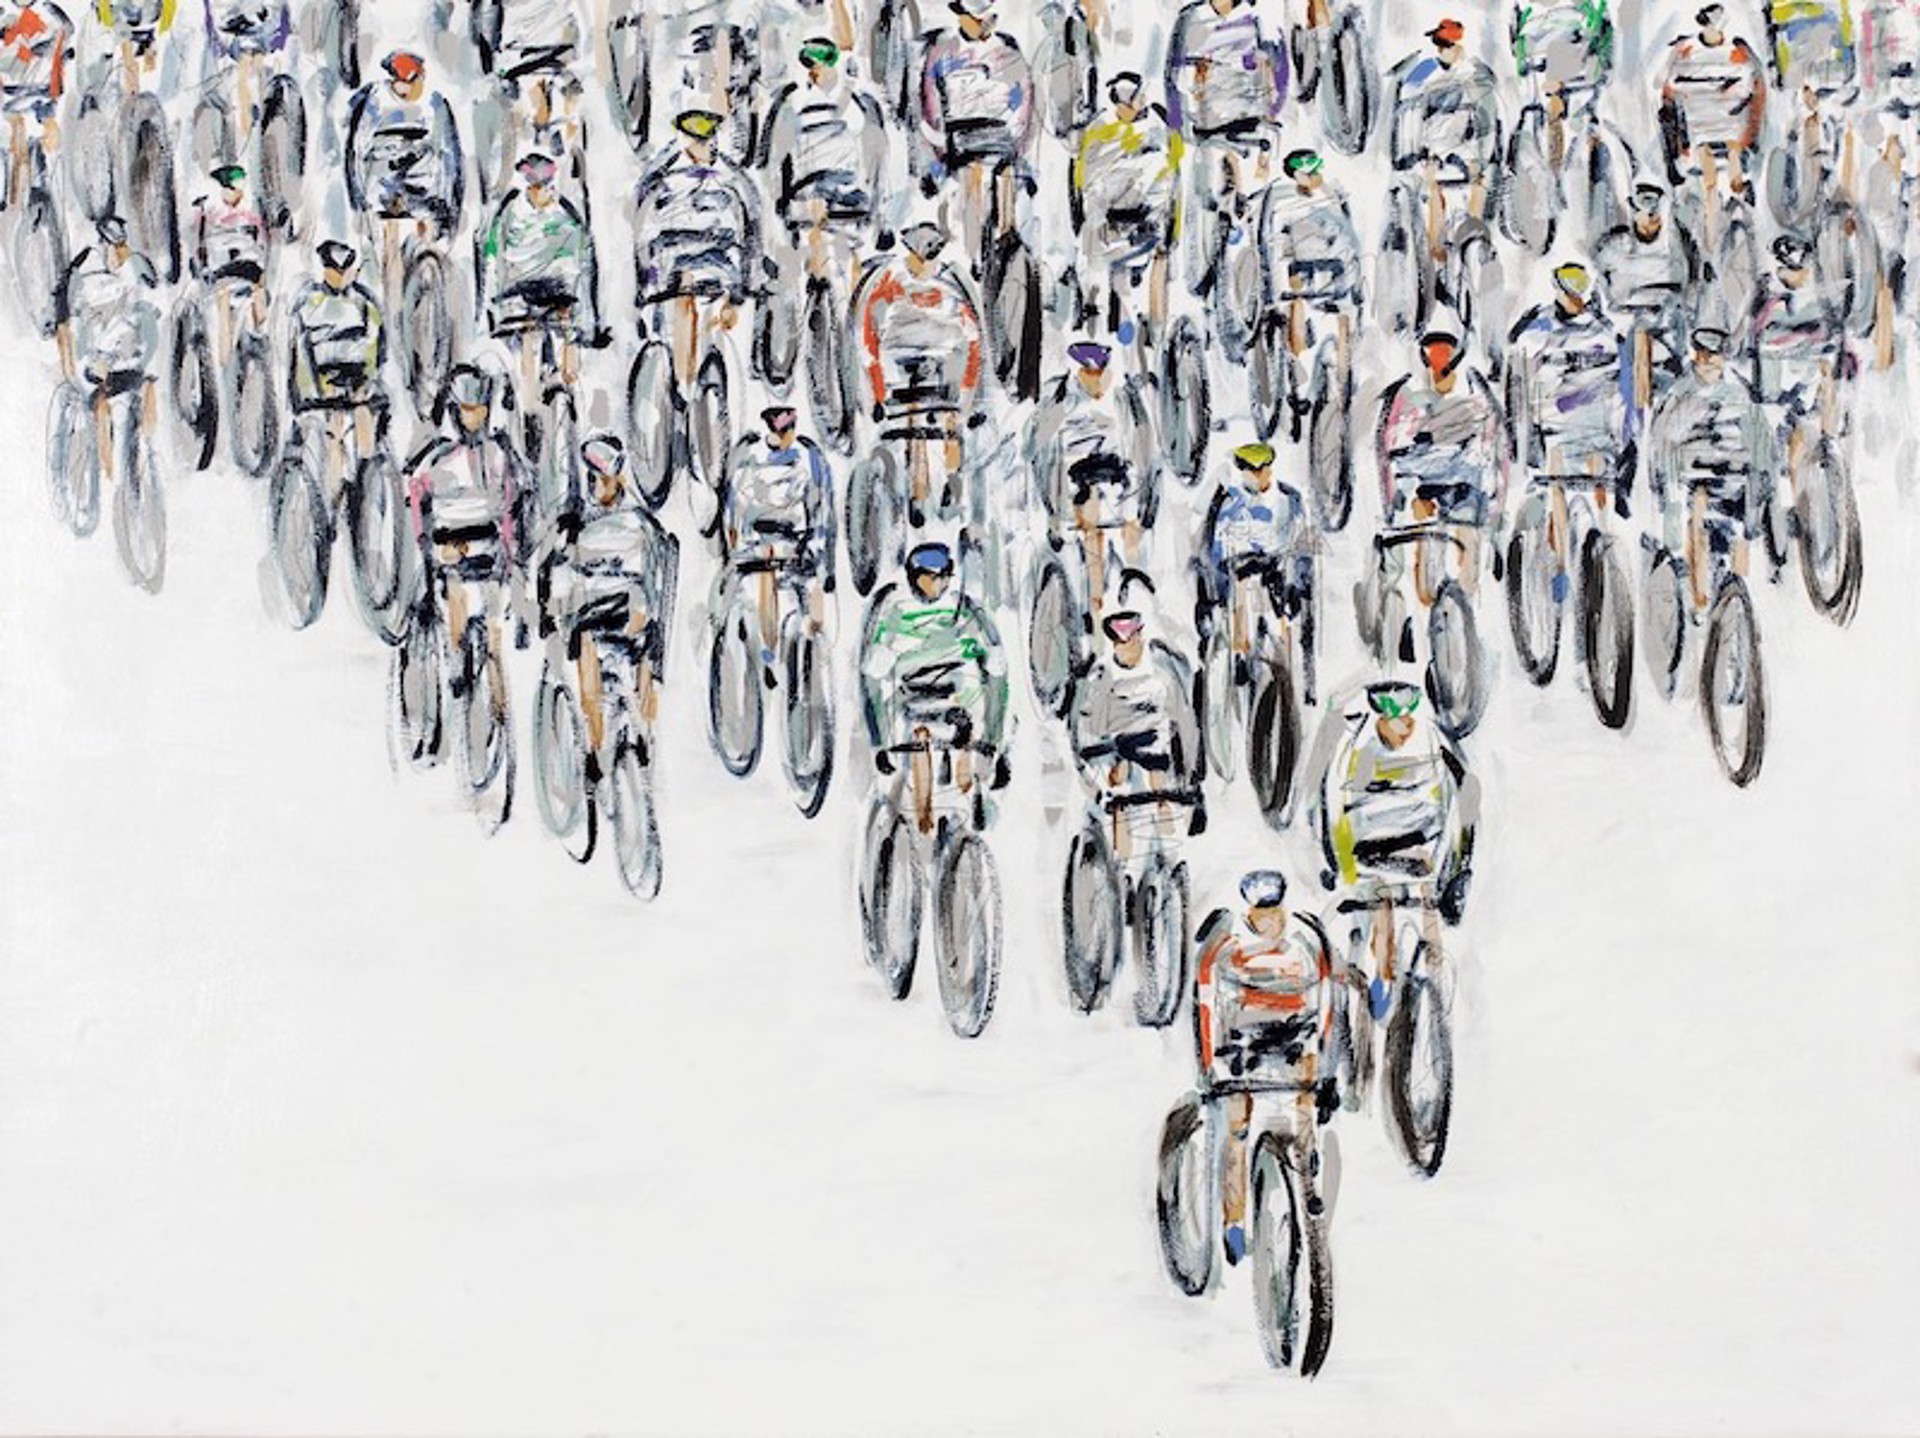 Ride On, Ride on, Ride On #486 by Heather Blanton